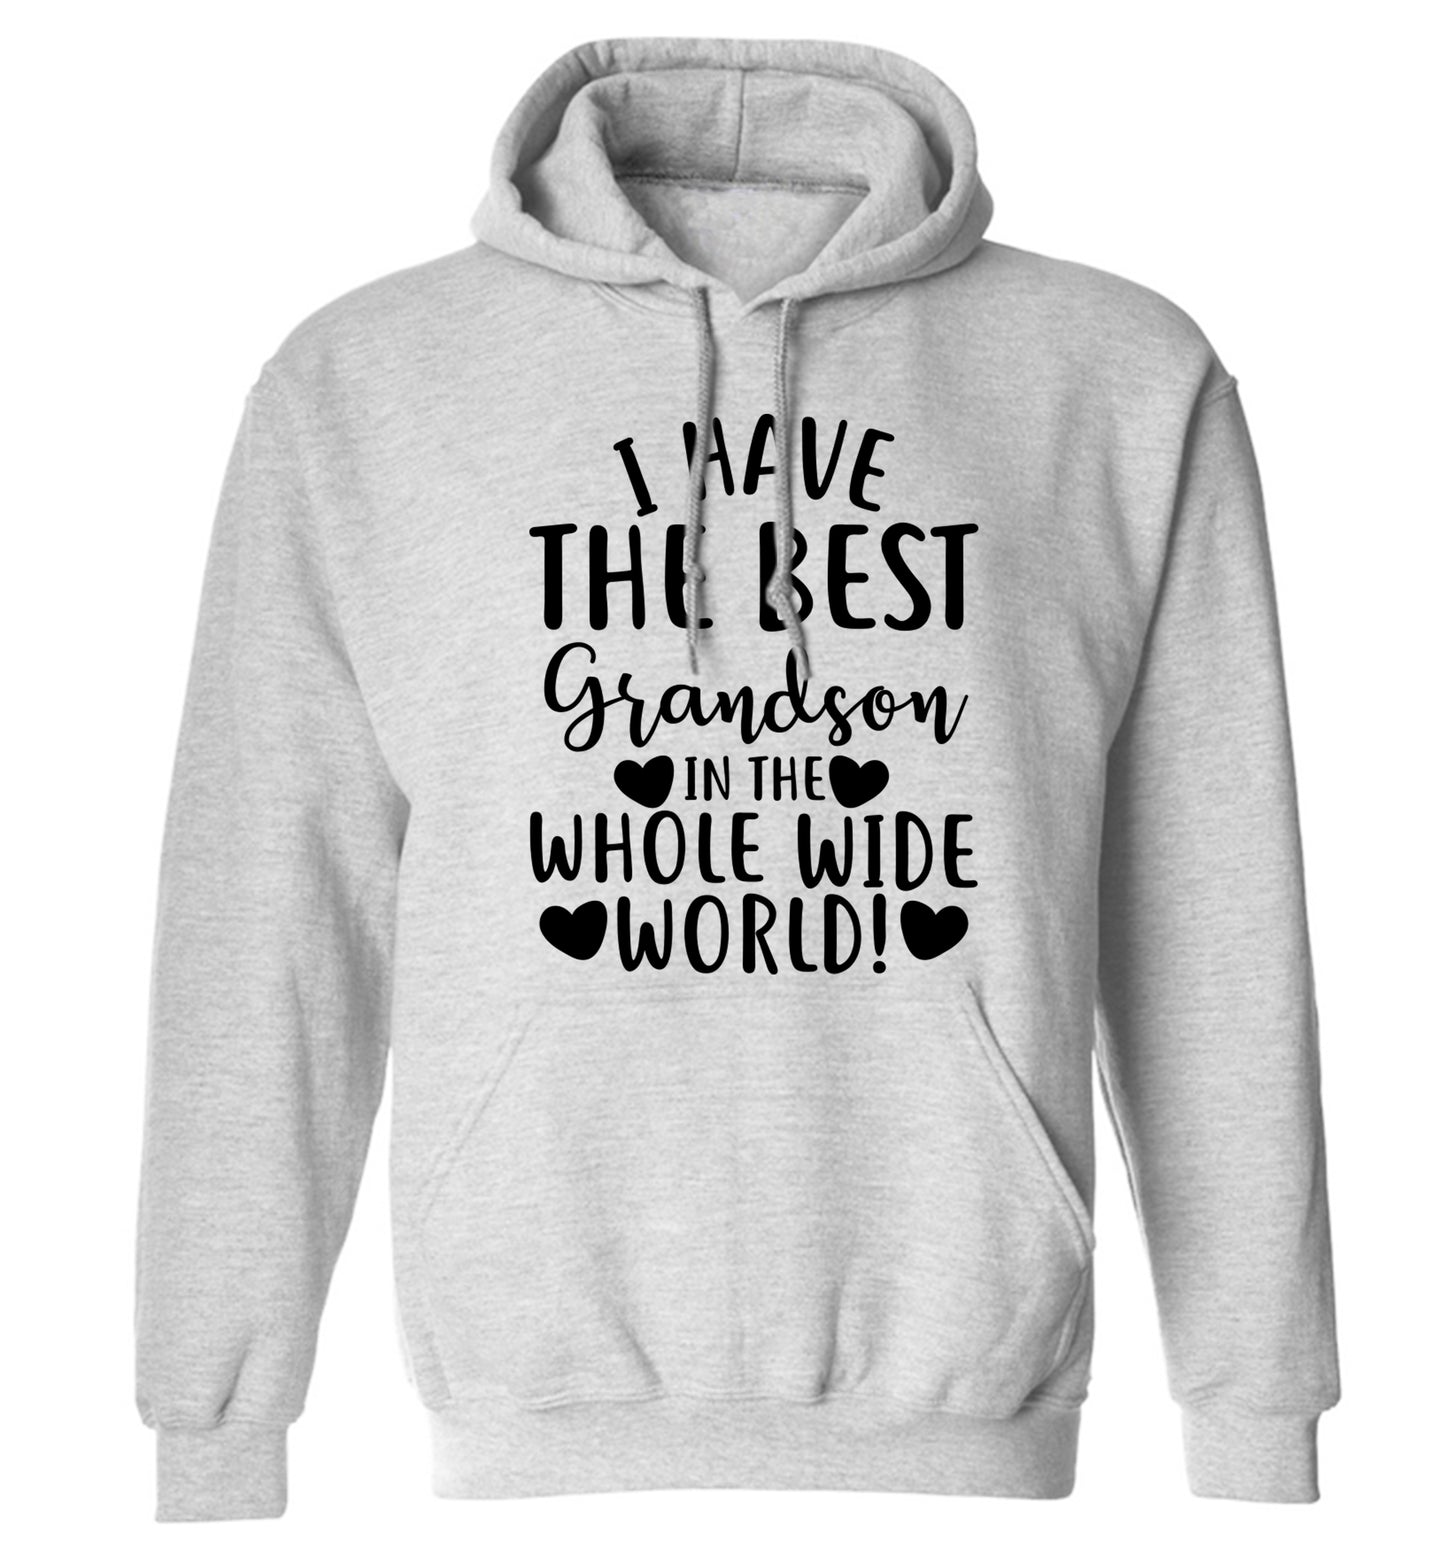 I have the best grandson in the whole wide world! adults unisex grey hoodie 2XL